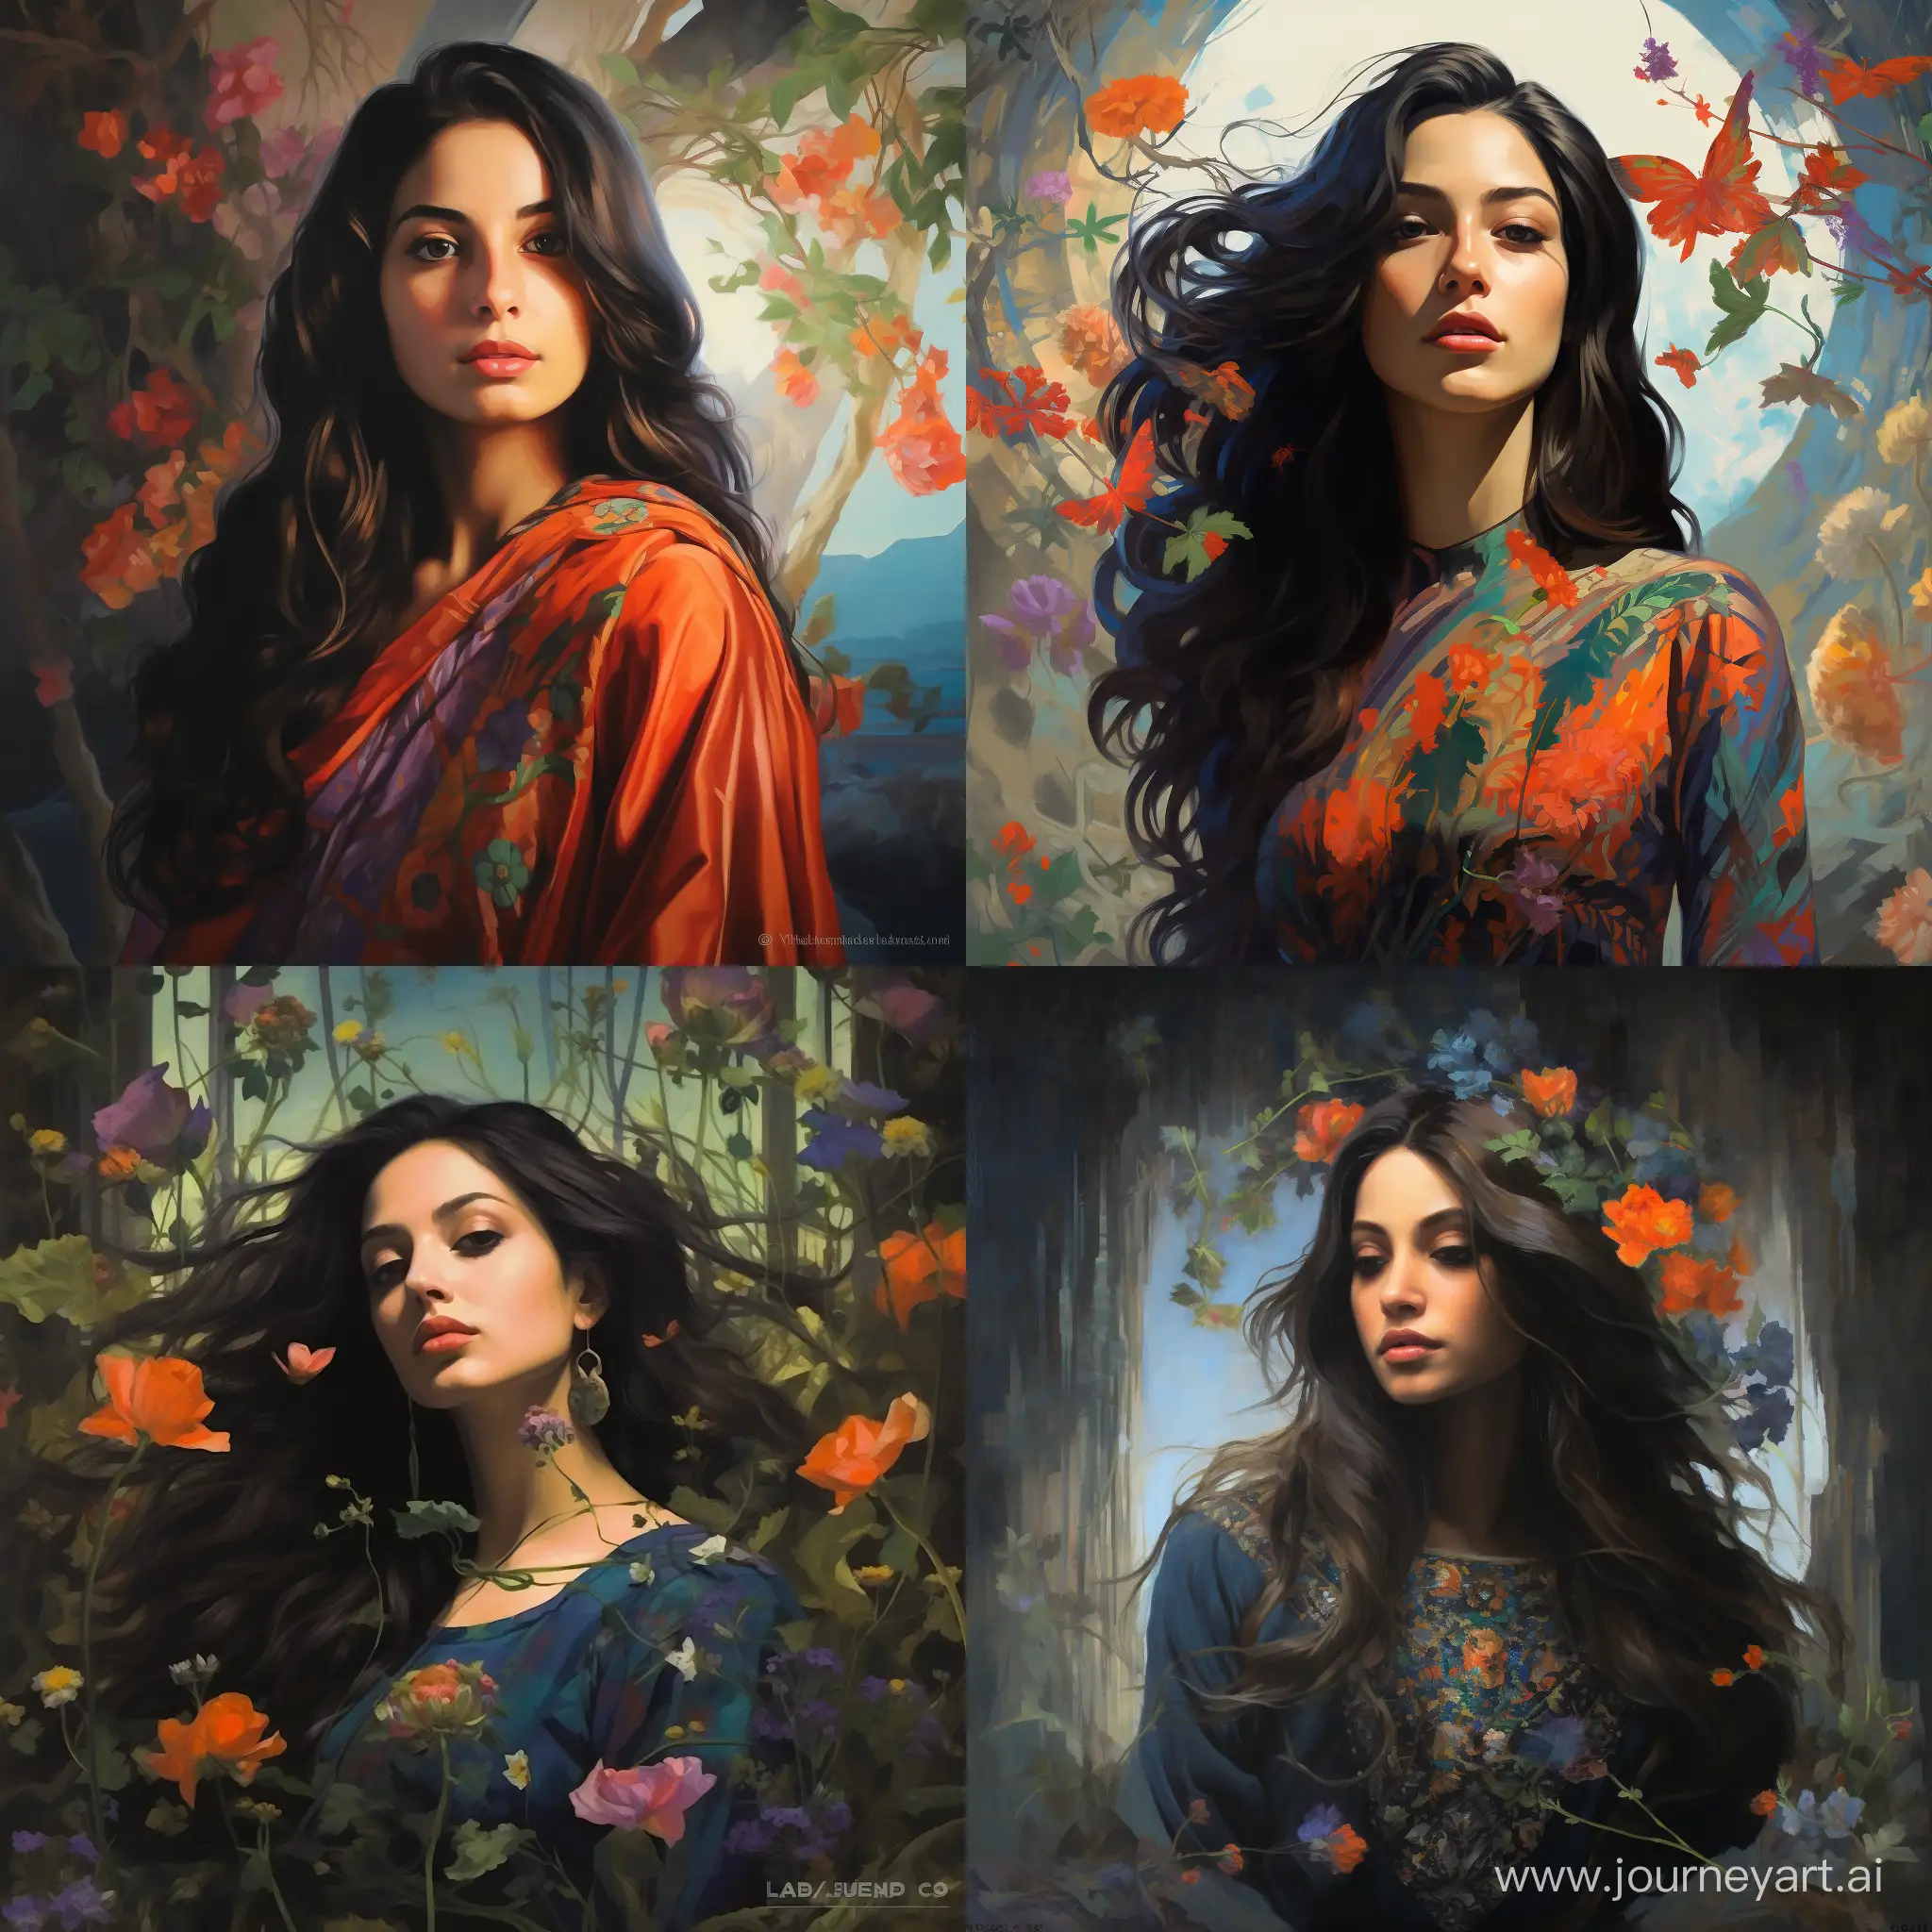 a surreal iranian woman portrait, vibrant, iridescent flora and fauna float weightlessly. The scene should exude an otherworldly tranquility, with a subtle interplay of light and shadow that defies conventional physics.